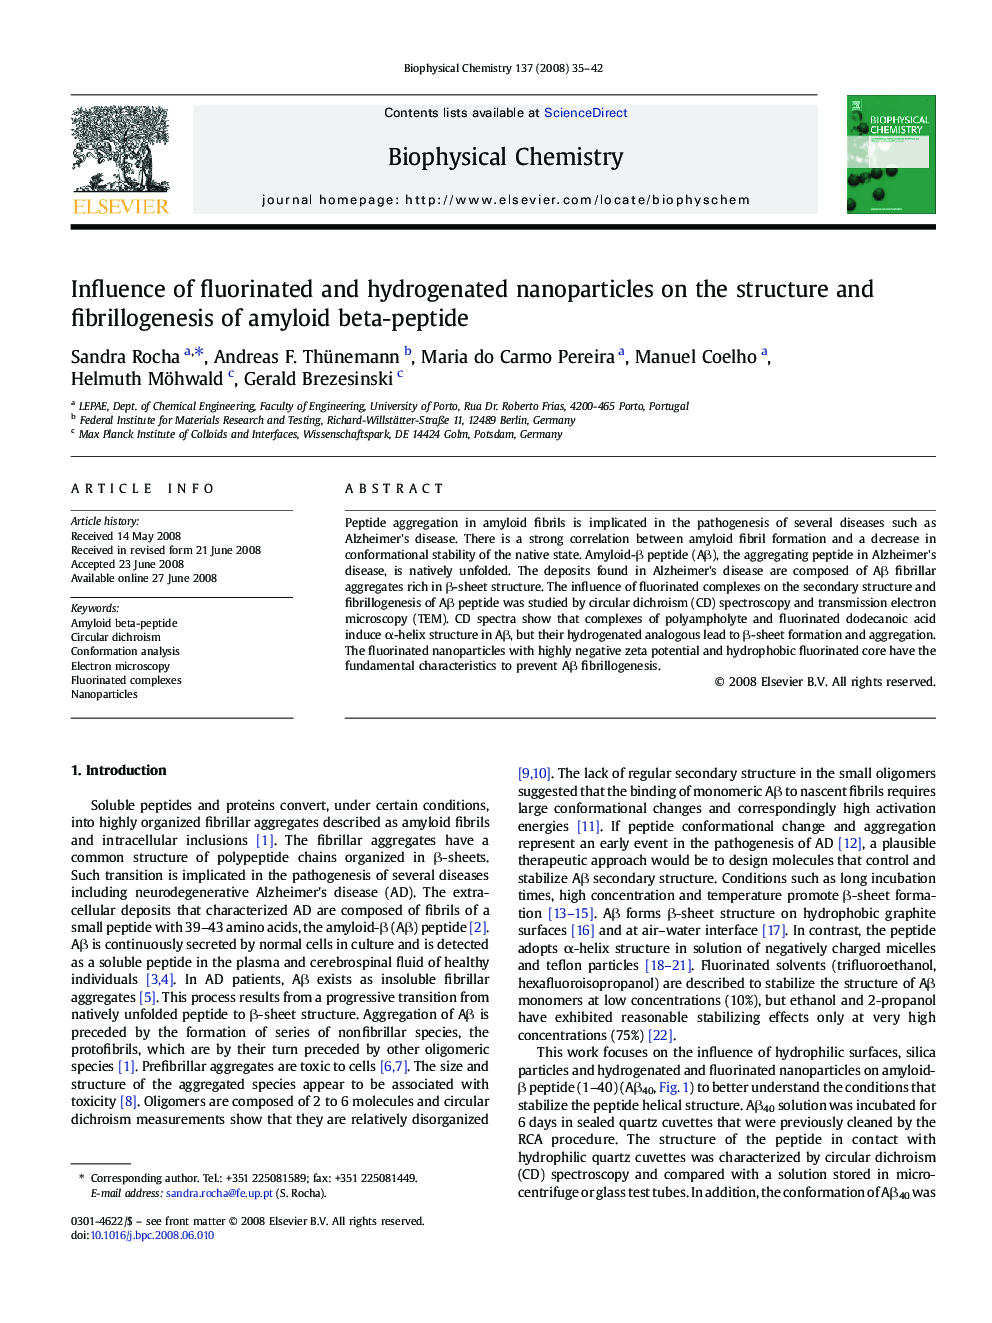 Influence of fluorinated and hydrogenated nanoparticles on the structure and fibrillogenesis of amyloid beta-peptide